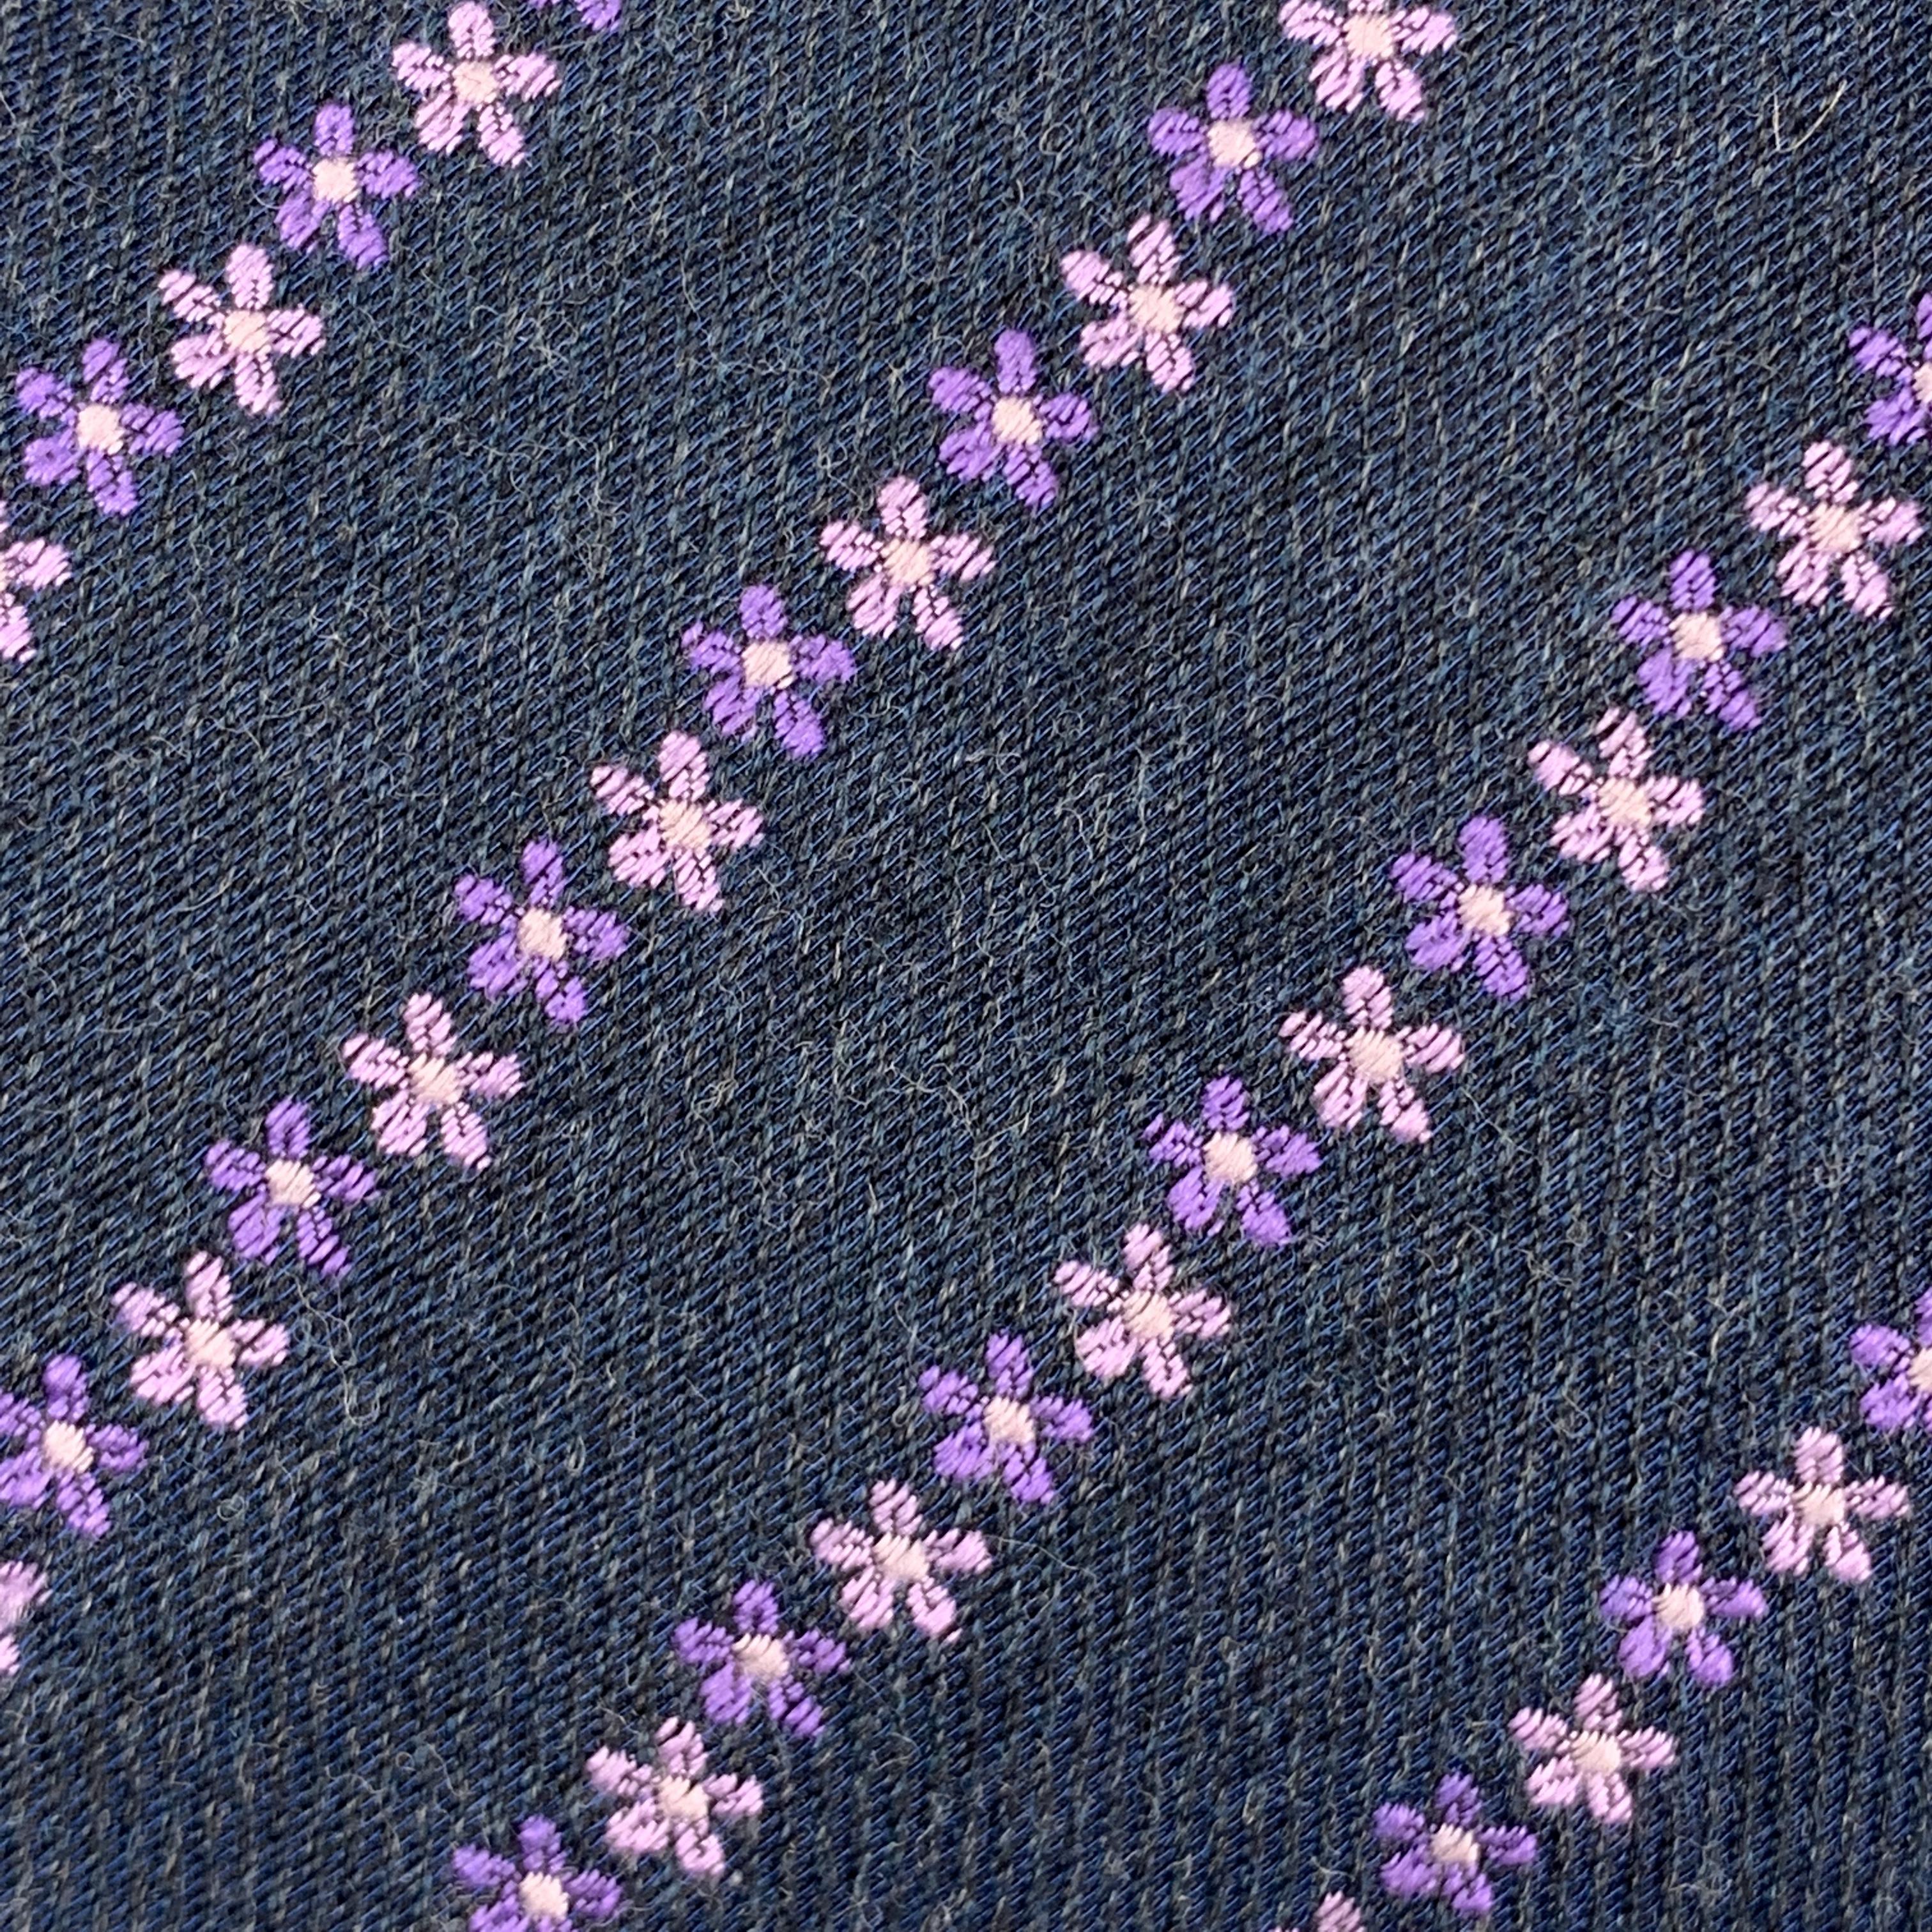 CHRISTIAN LACROIX necktie comes in navy silk wool twill with all over purple floral stripe print. Made in Italy.

Excellent Pre-Owned Condition. 

Width: 4 in.